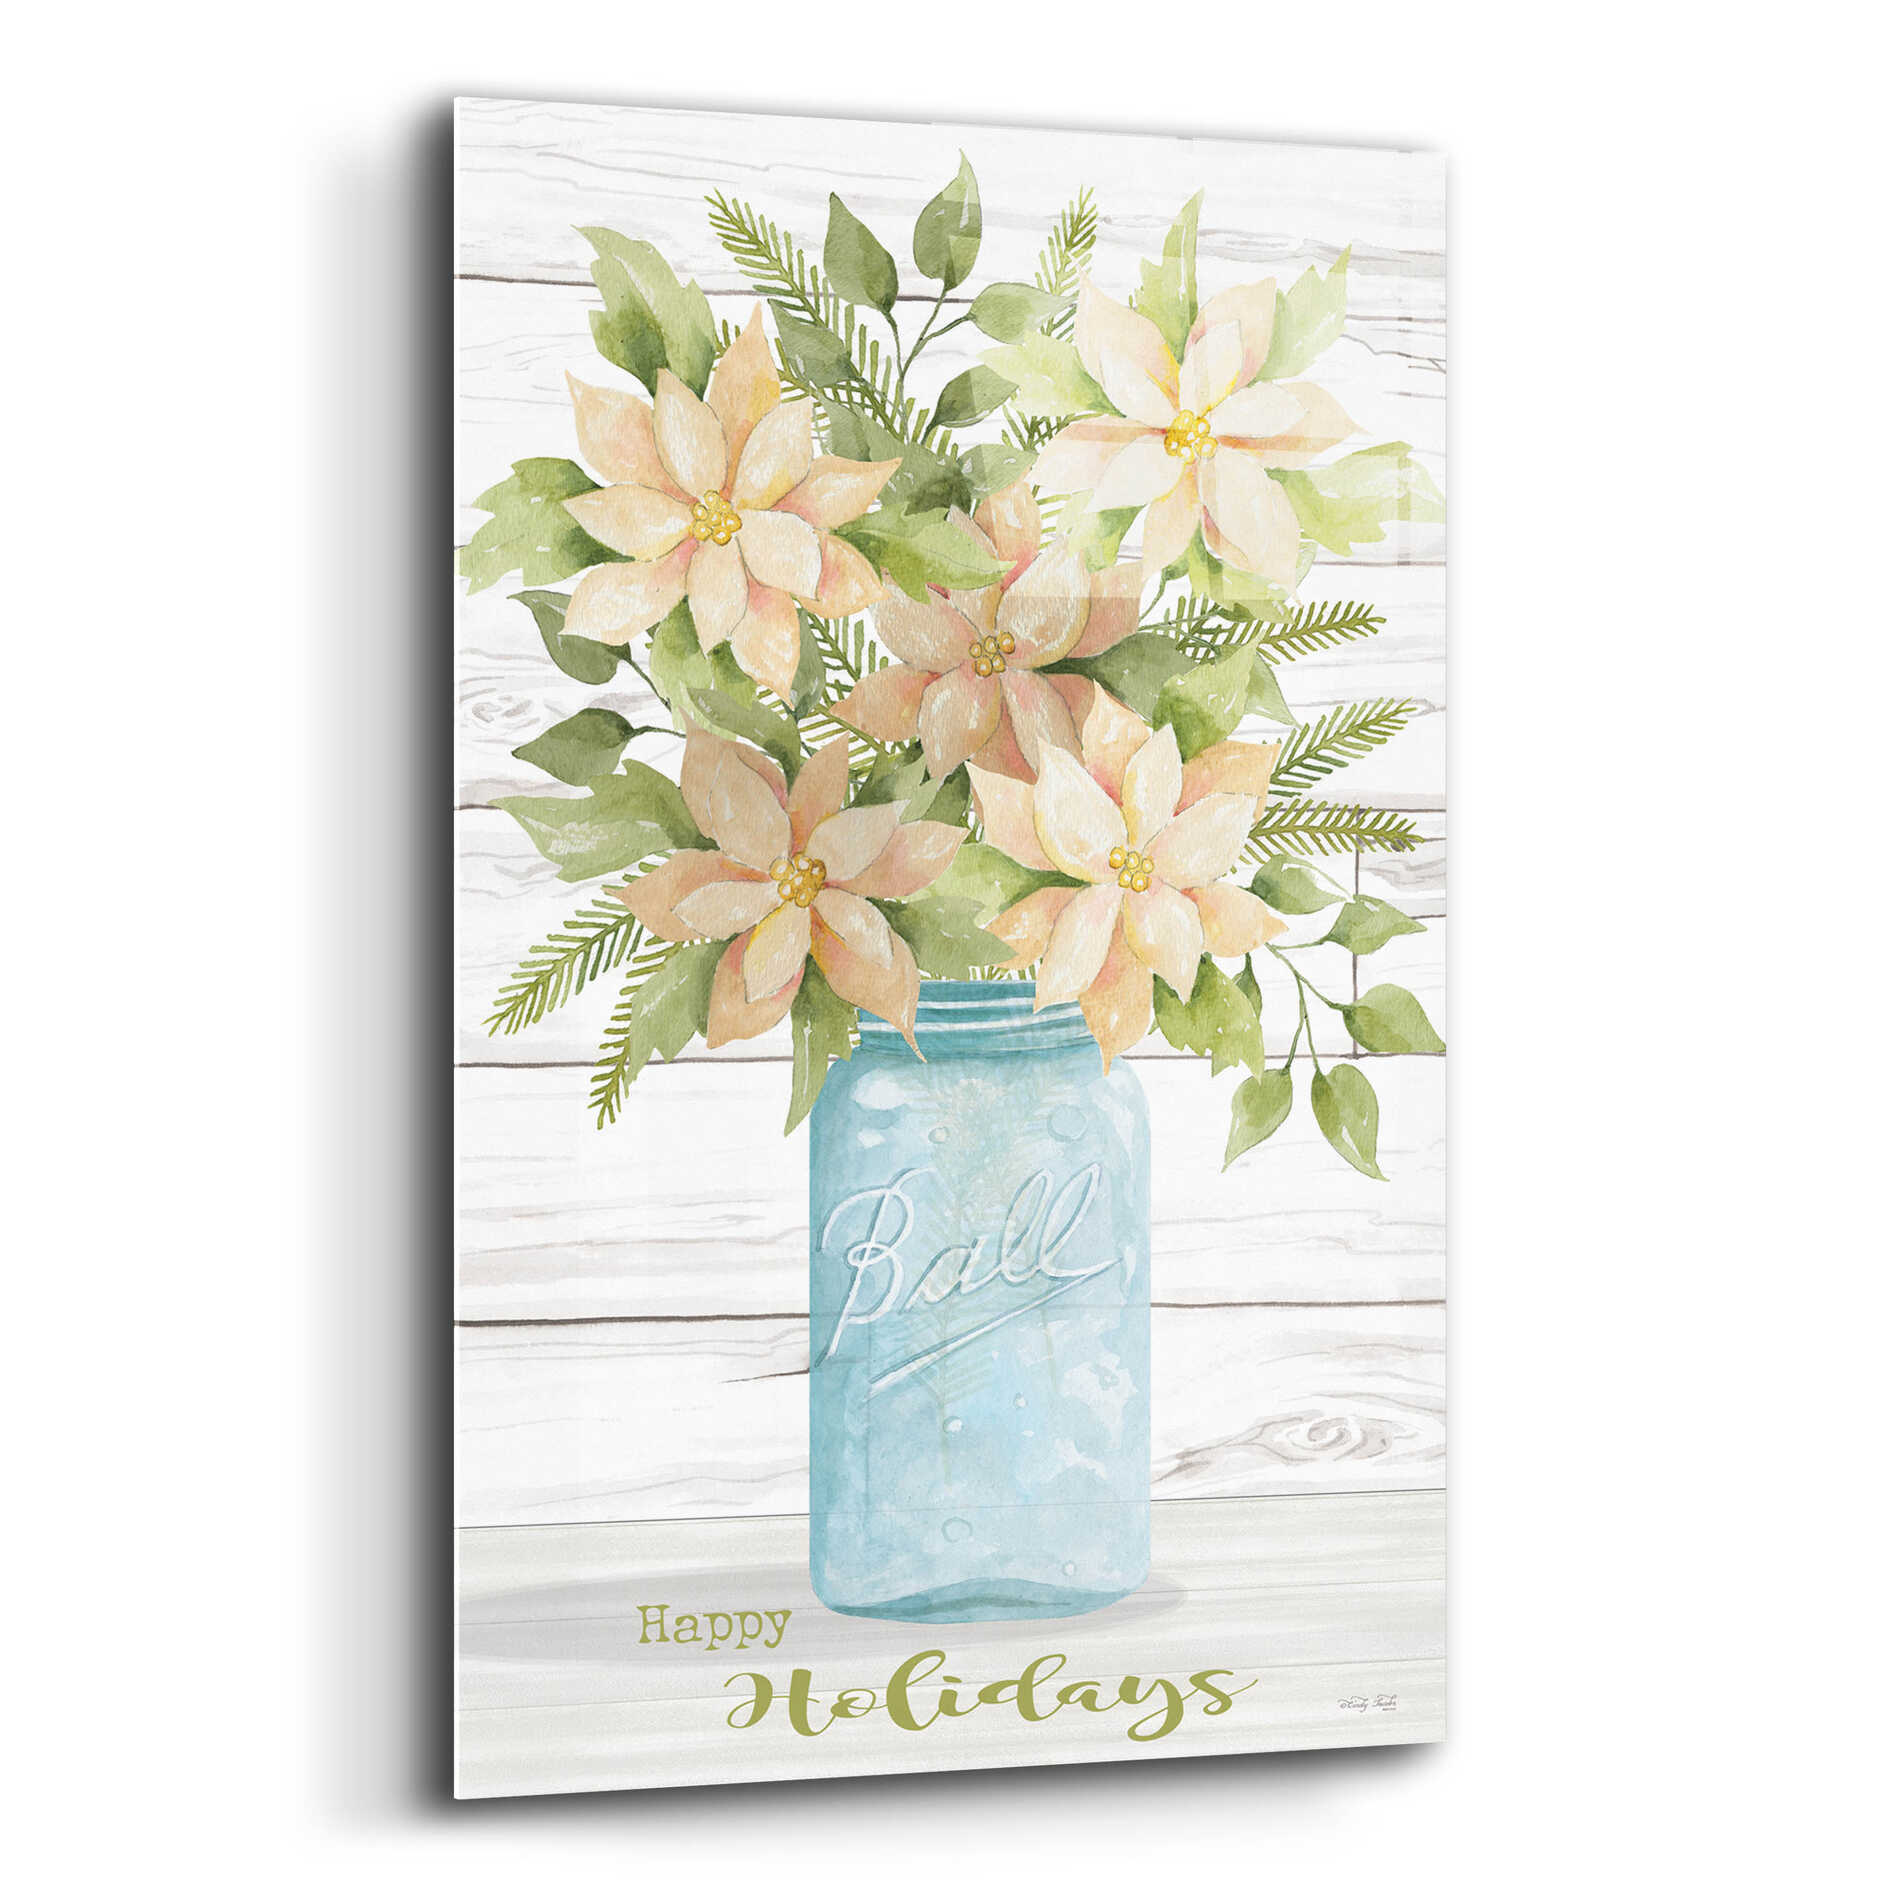 Epic Art 'Happy Holidays White Poinsettias' by Cindy Jacobs, Acrylic Glass Wall Art,16x24